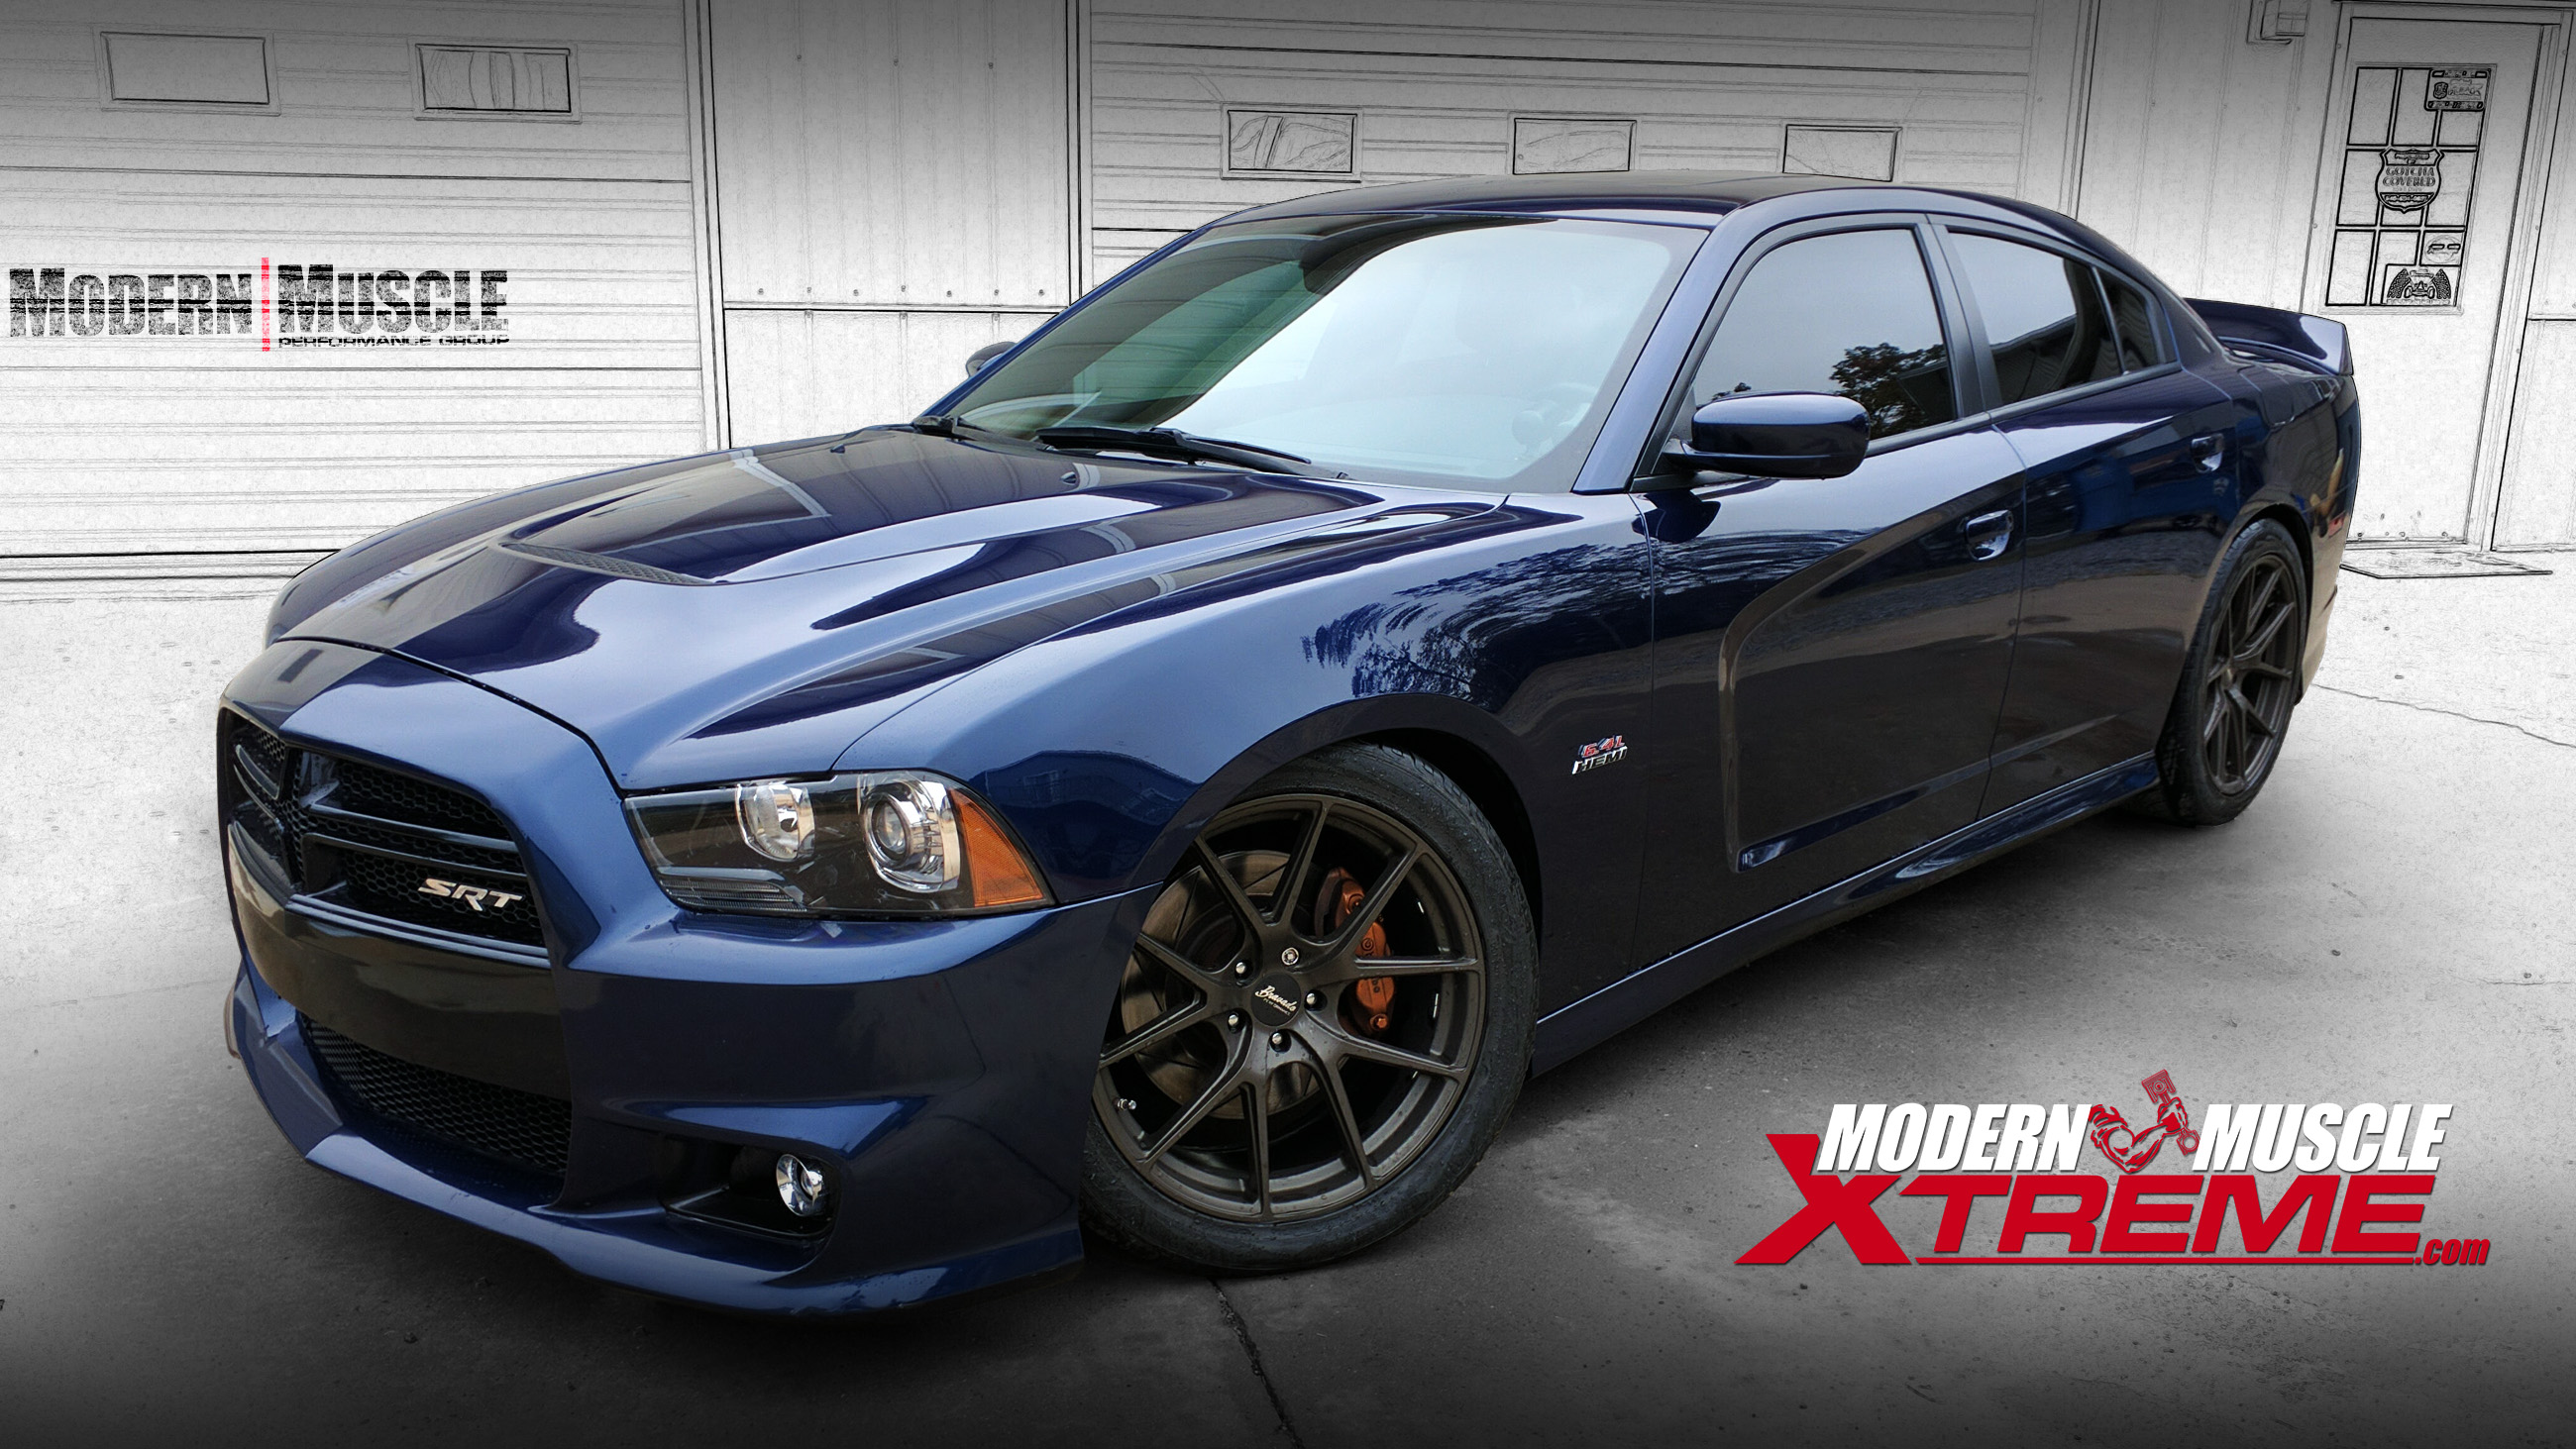 Forged 392 HEMI Engine Procharger Supercharged 2013 Charger Build by Modern Muscle Performance